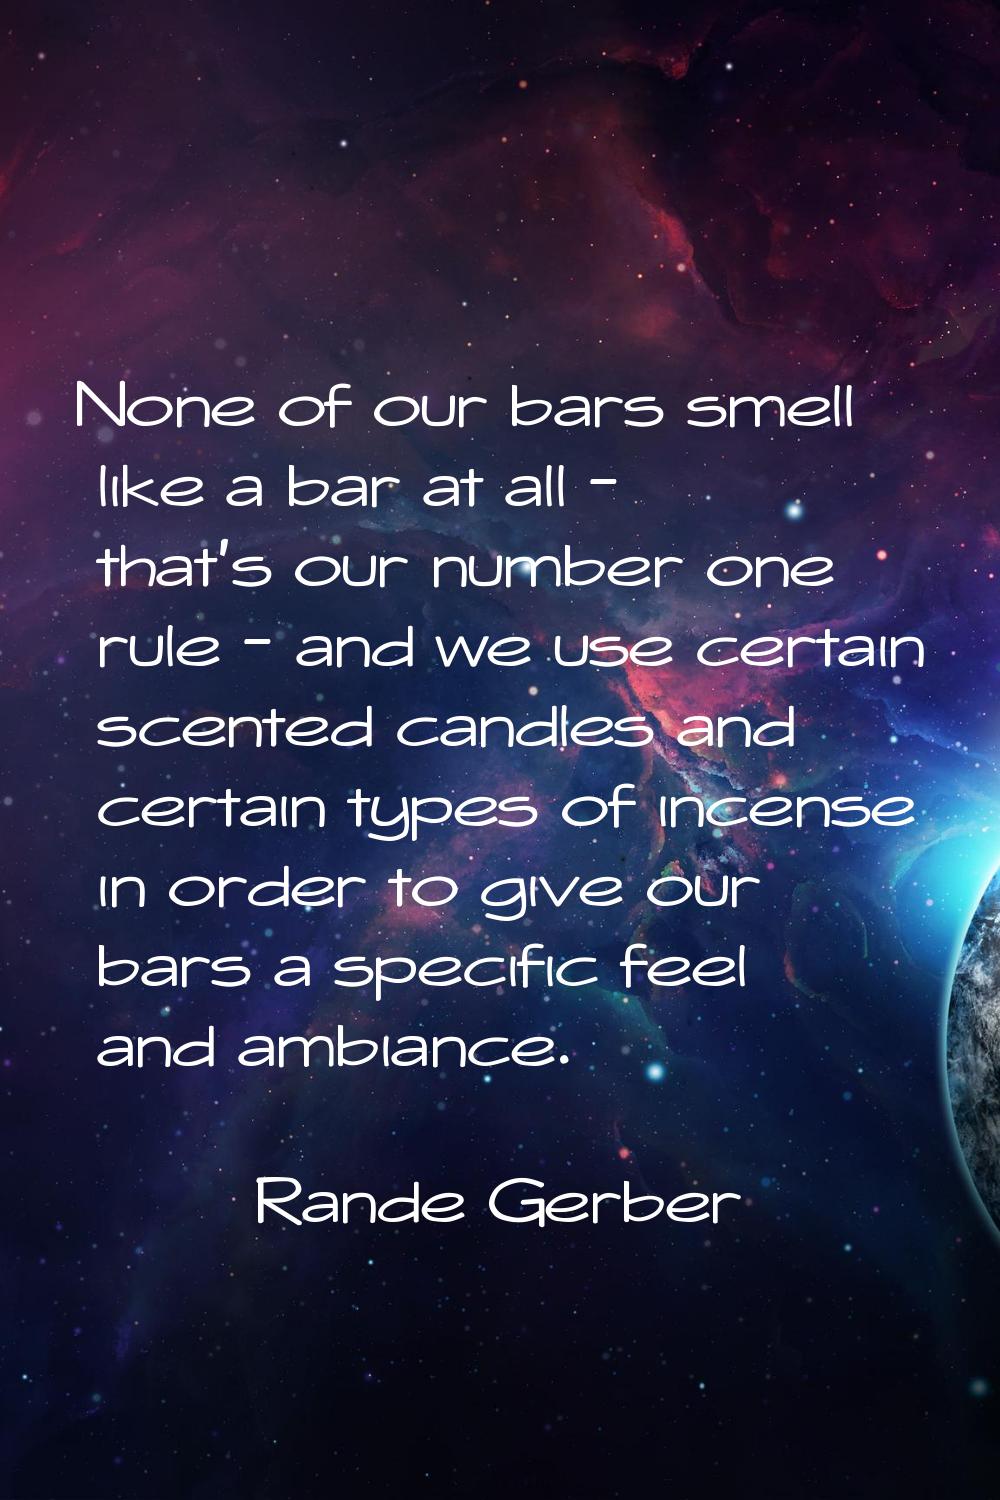 None of our bars smell like a bar at all - that's our number one rule - and we use certain scented 